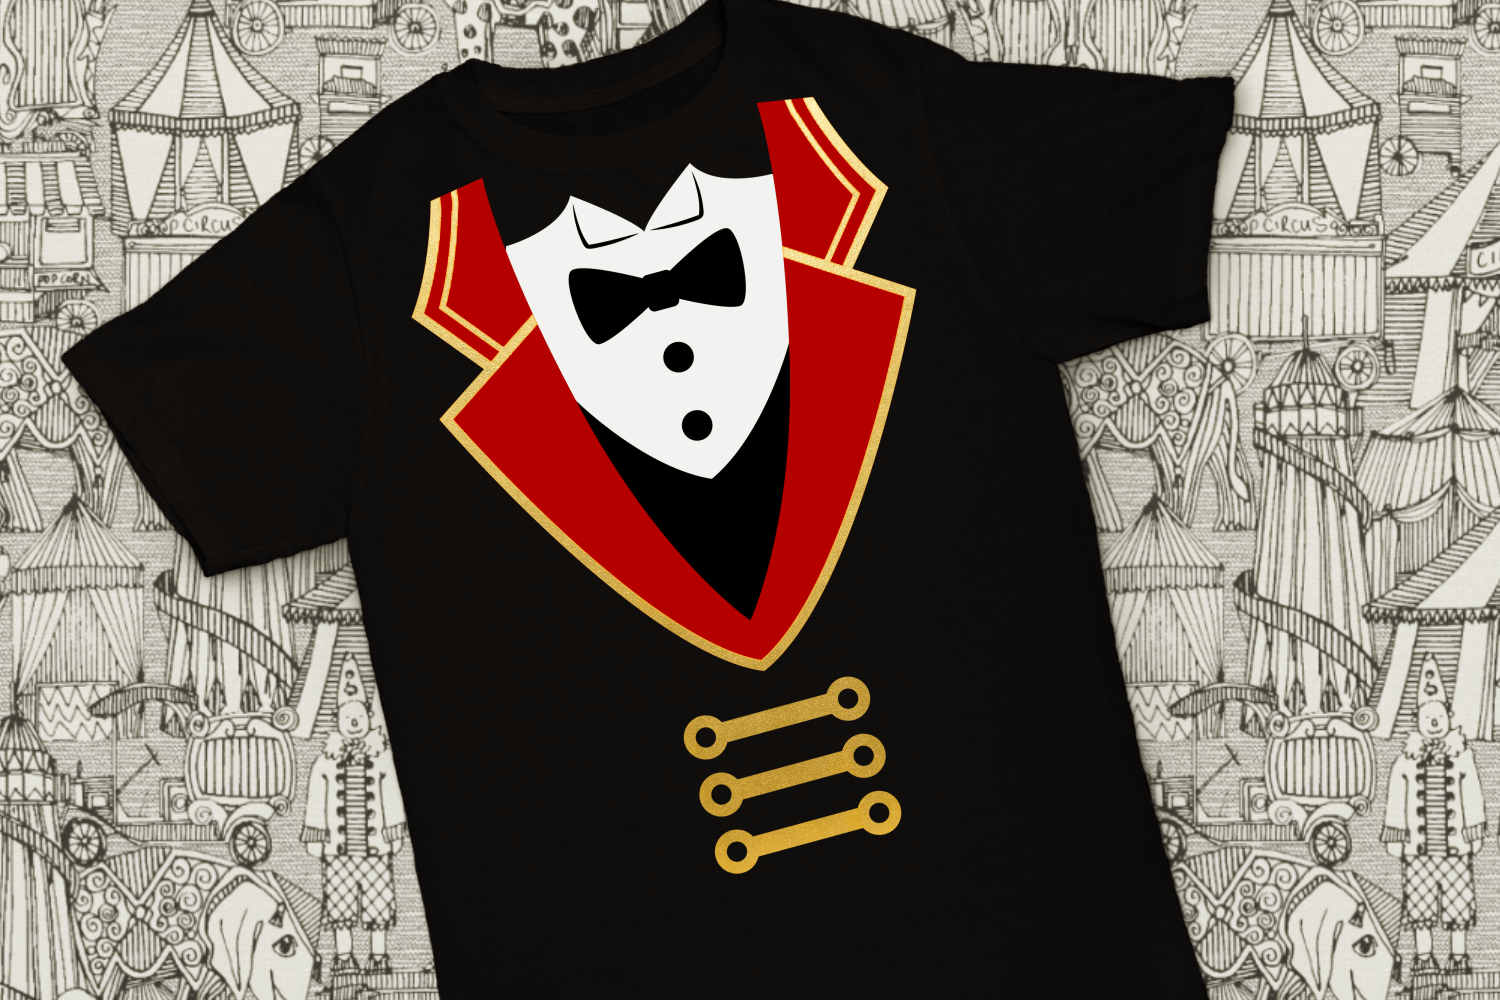 Download Circus Ringmaster Coat and Tuxedo | SVG | PNG | DXF By Designed by Geeks | TheHungryJPEG.com